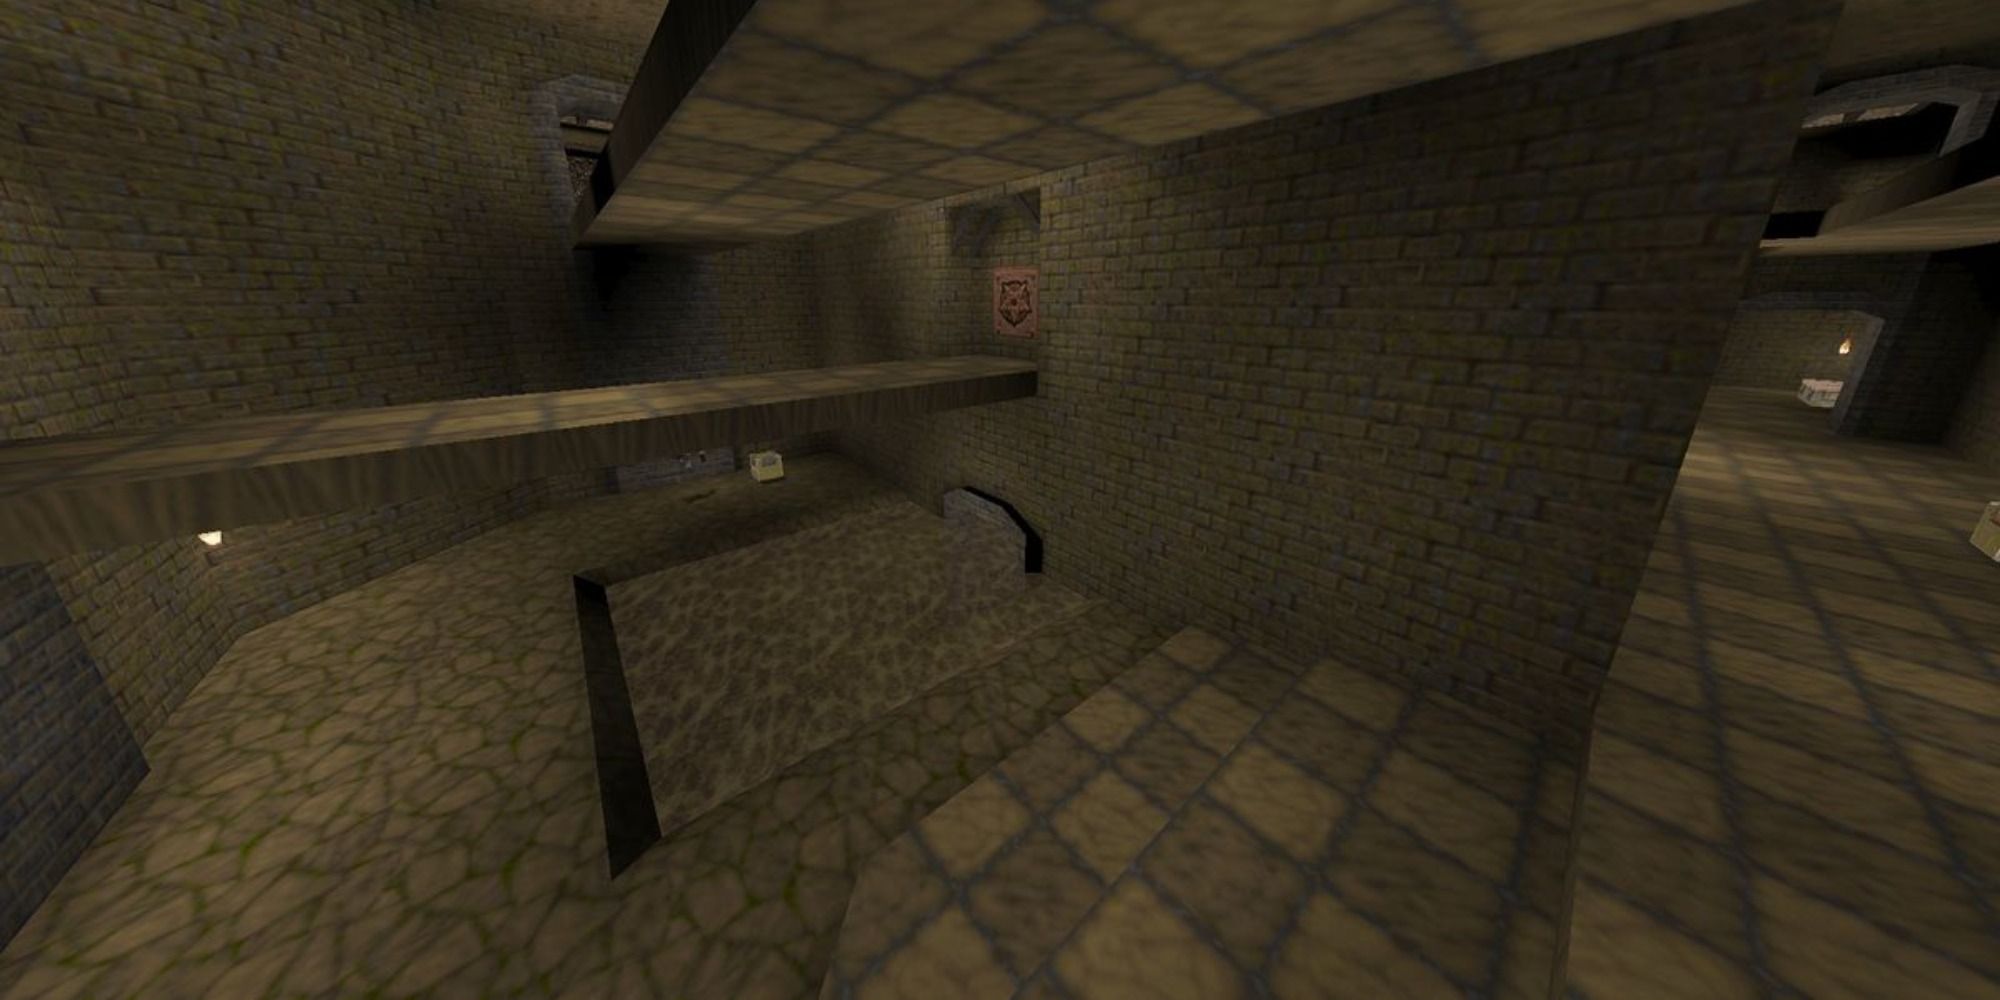 an overlook of the Quake multiplayer map DM5: The Cistern